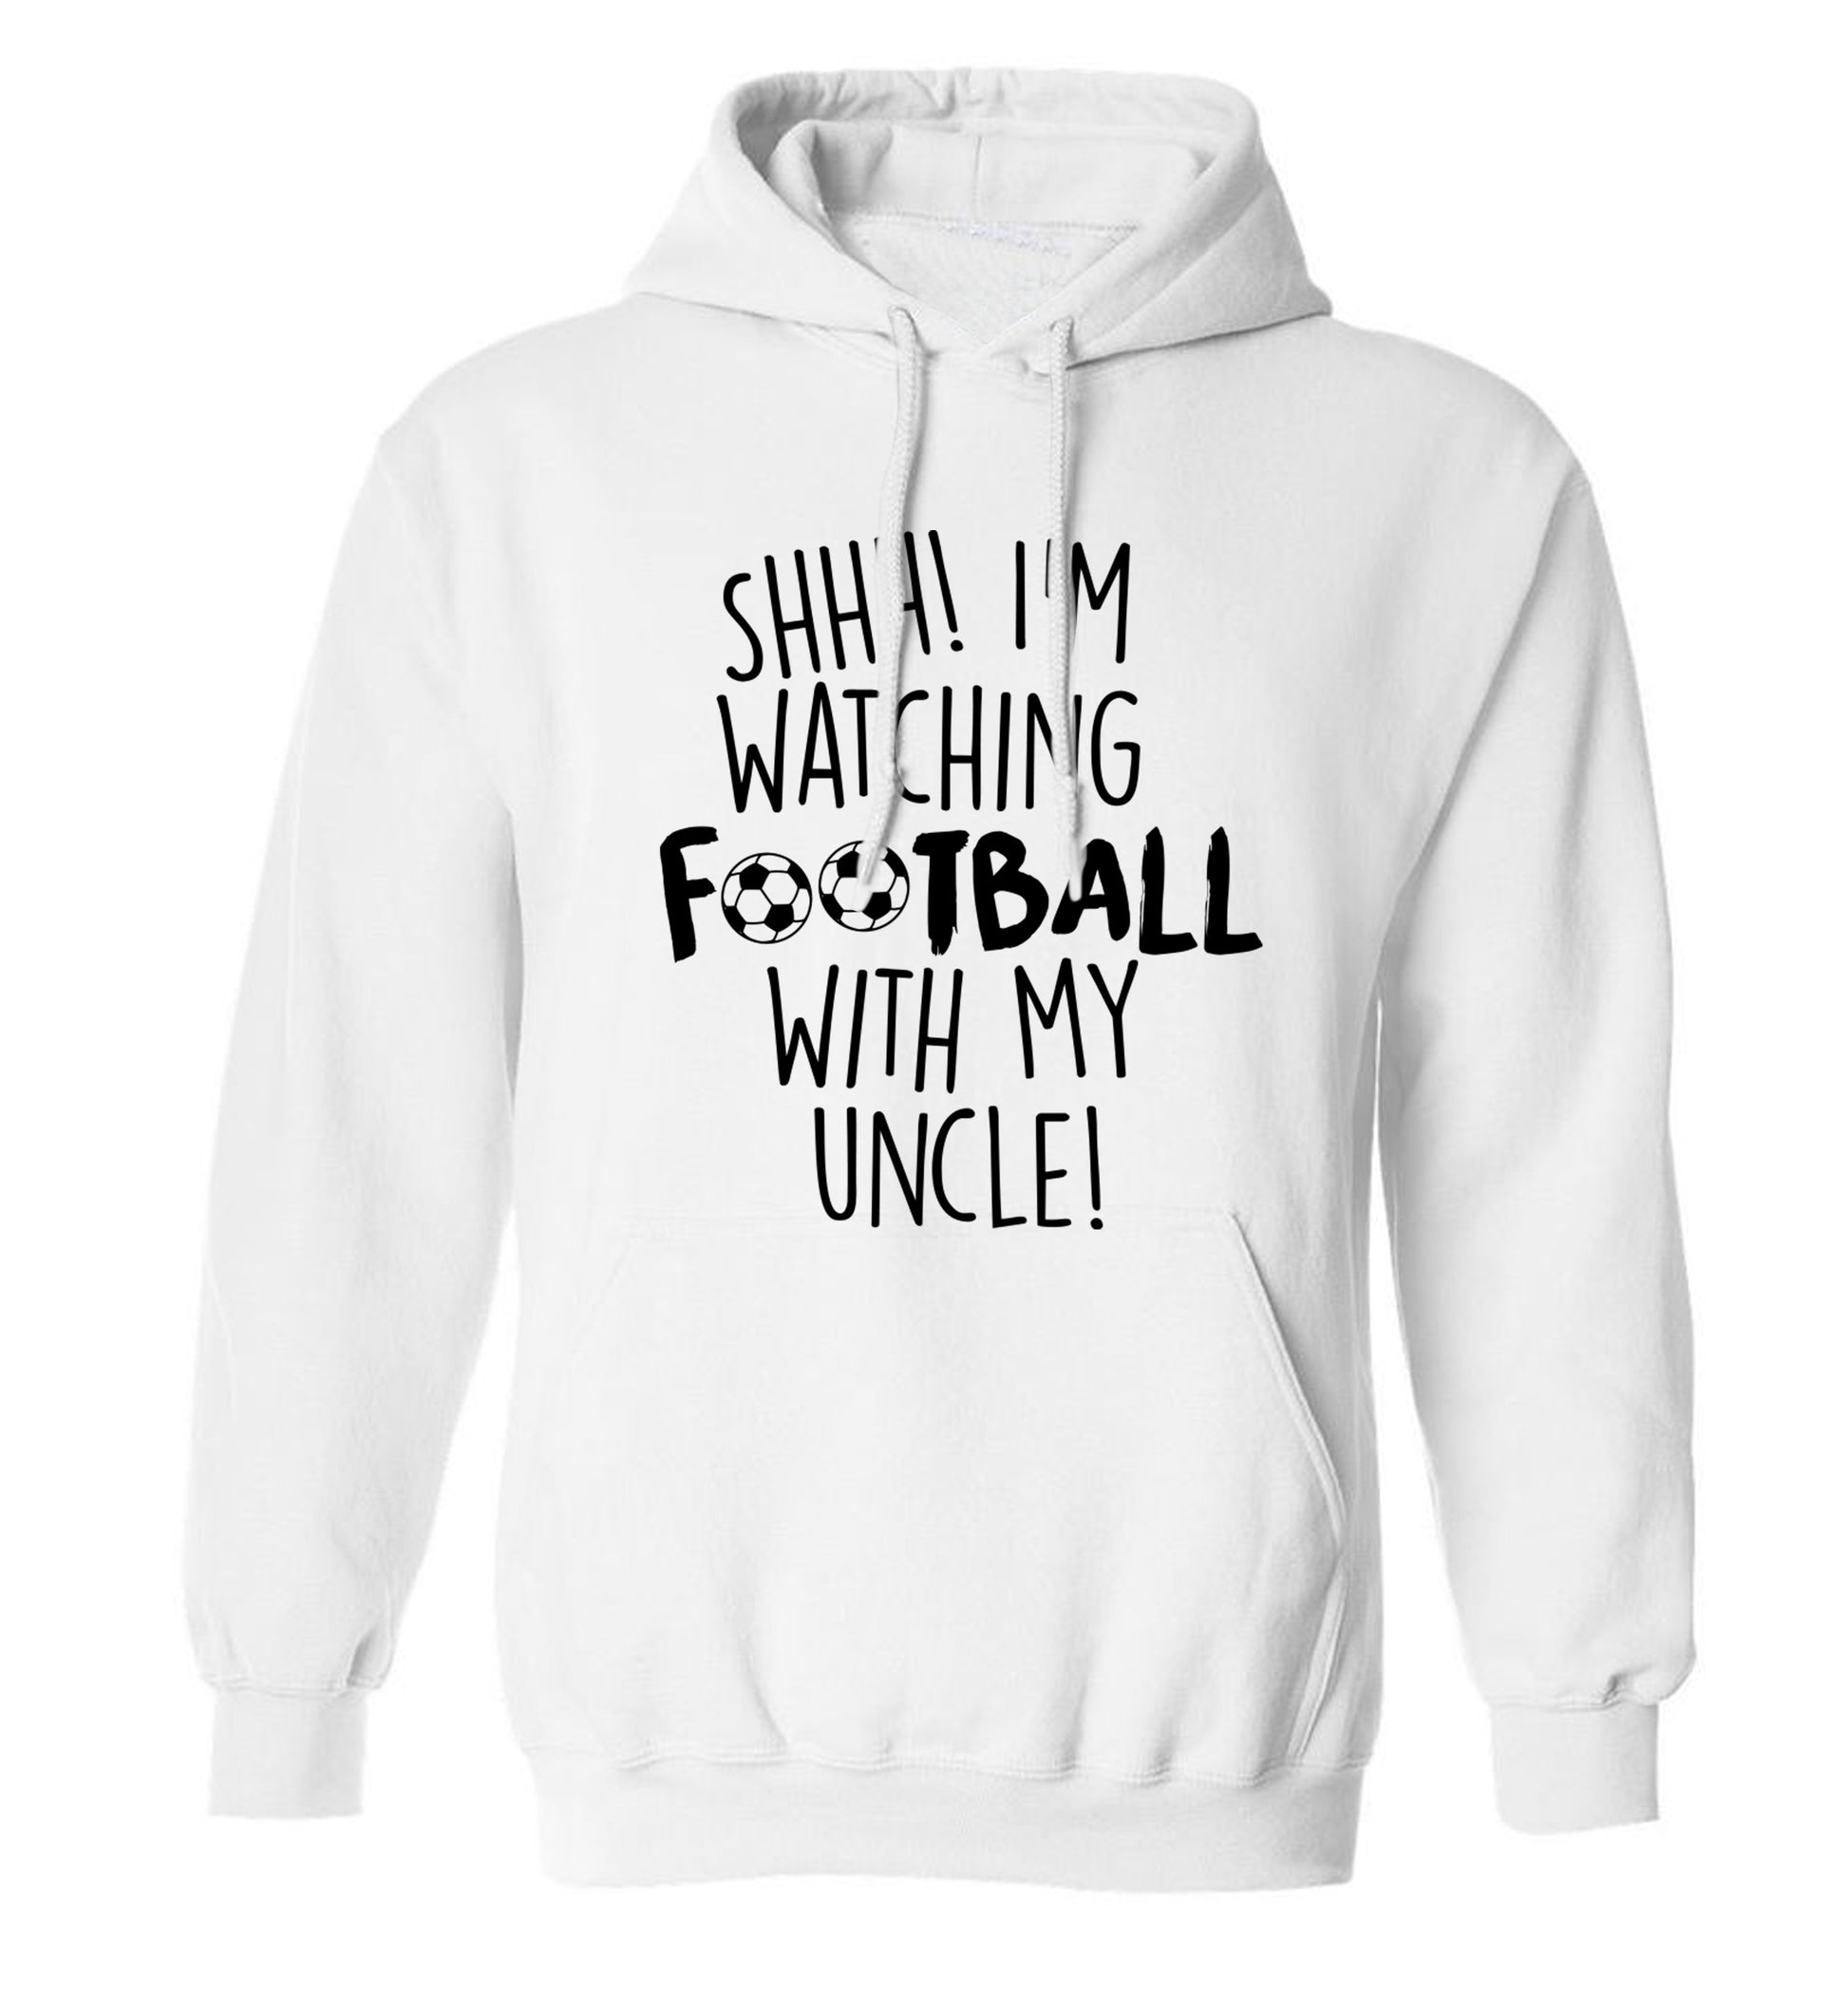 Shhh I'm watching football with my uncle adults unisexwhite hoodie 2XL